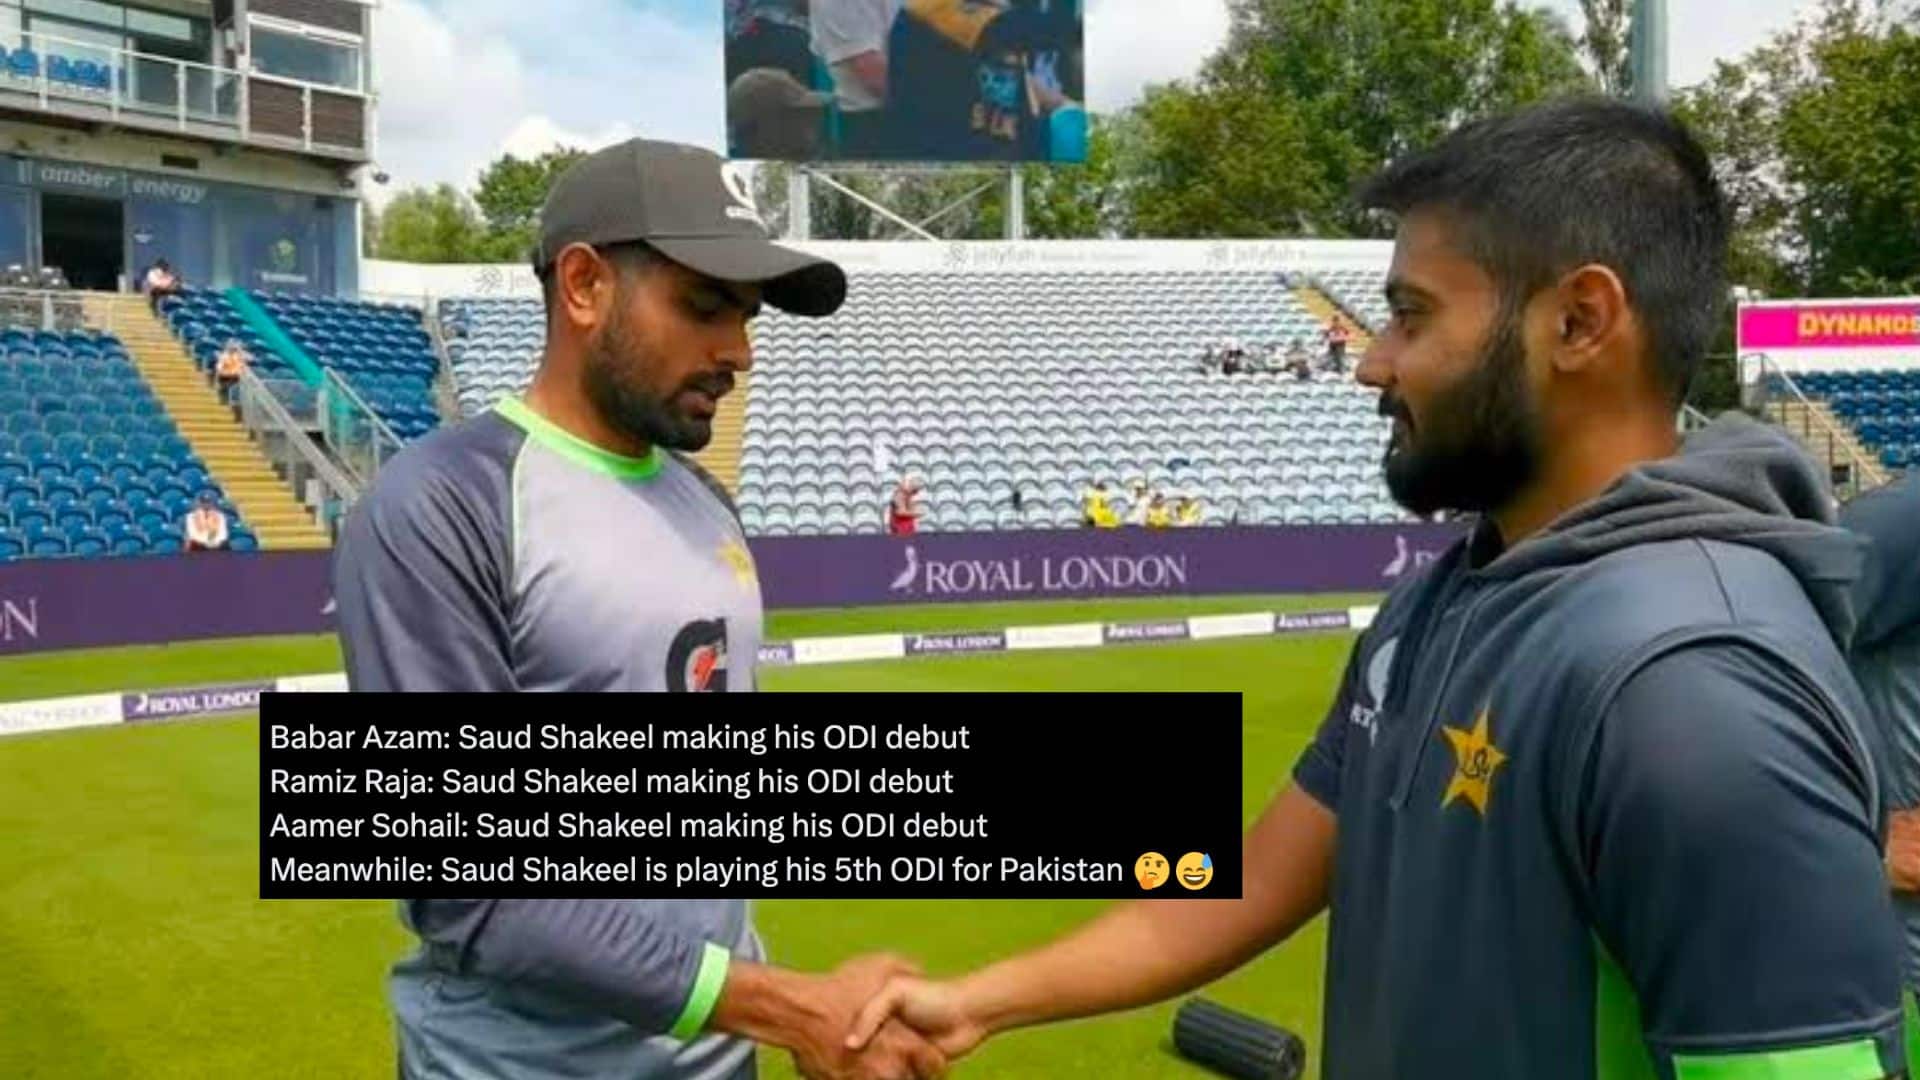 Babar Azam Hilariously Trolled on Social Media For 'Saud Shakeel Debut' Comment